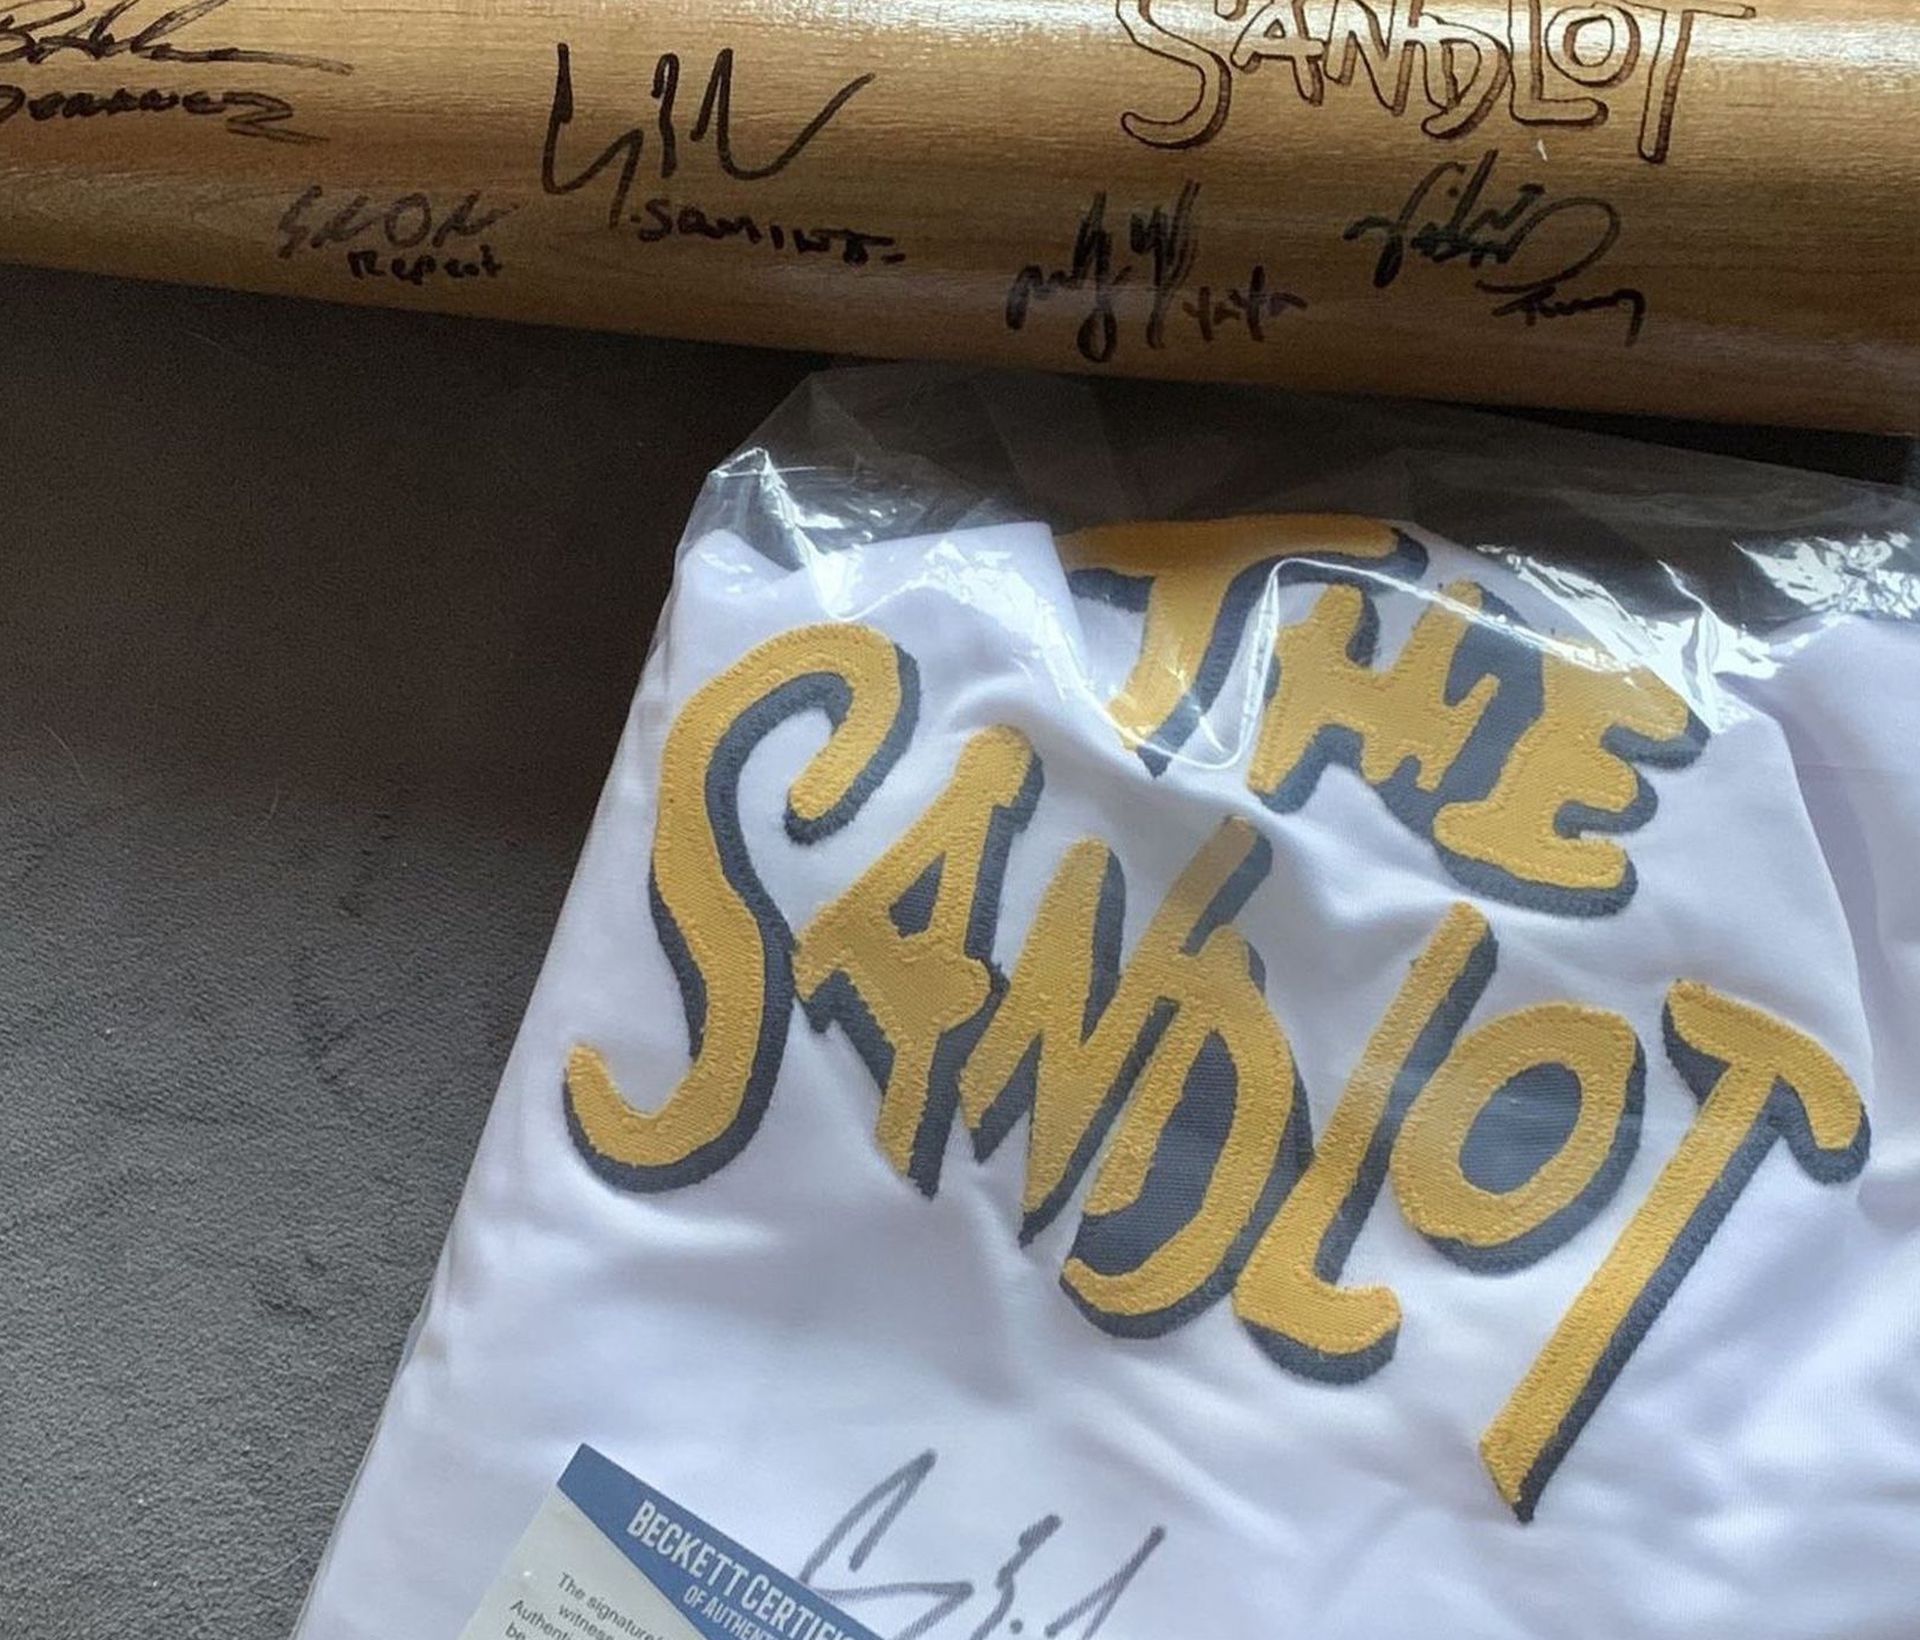 Sandlot jersey and baseball bat each signed by 6